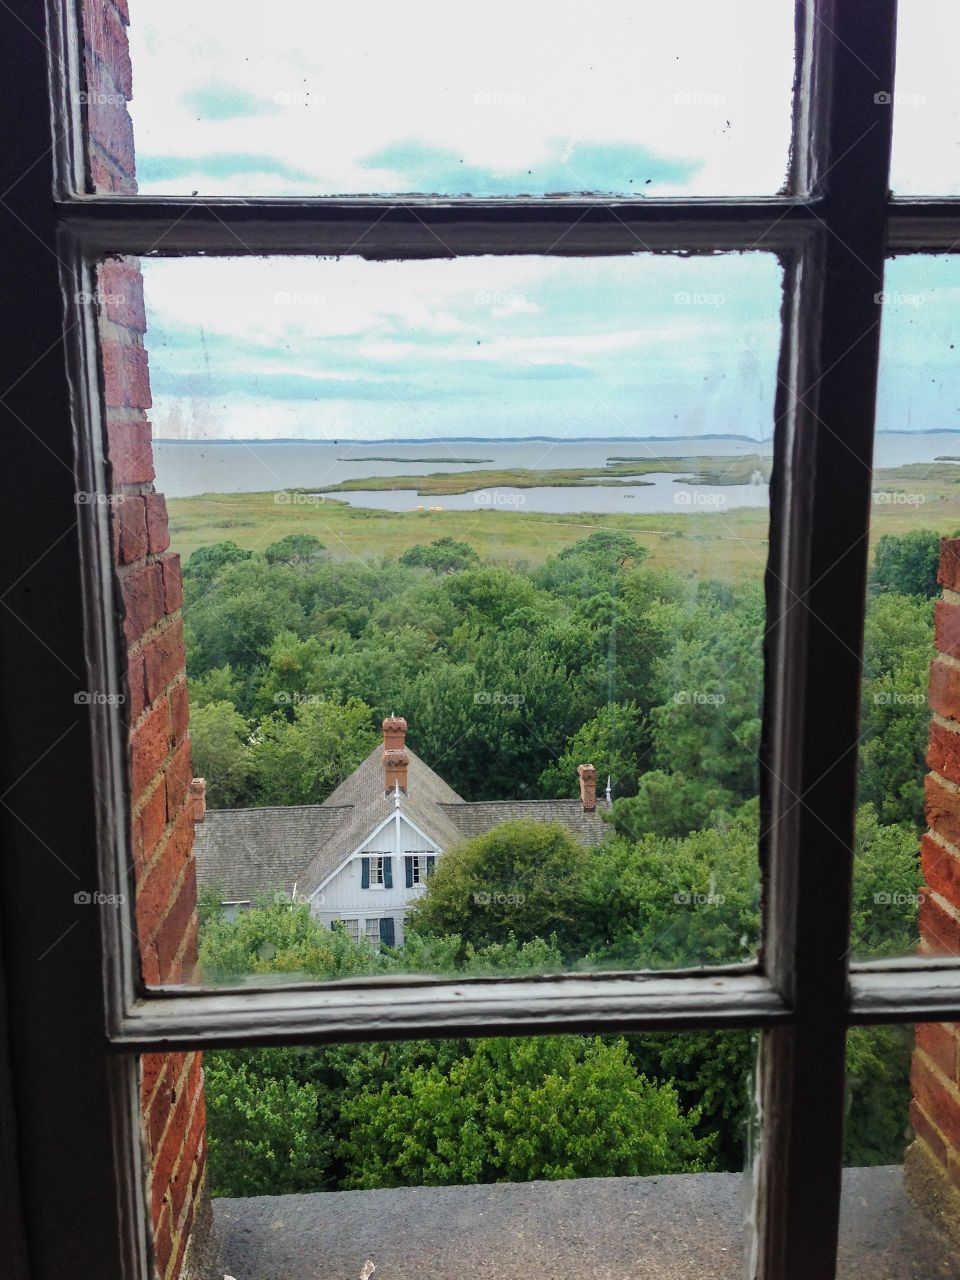 Looking out lighthouse window